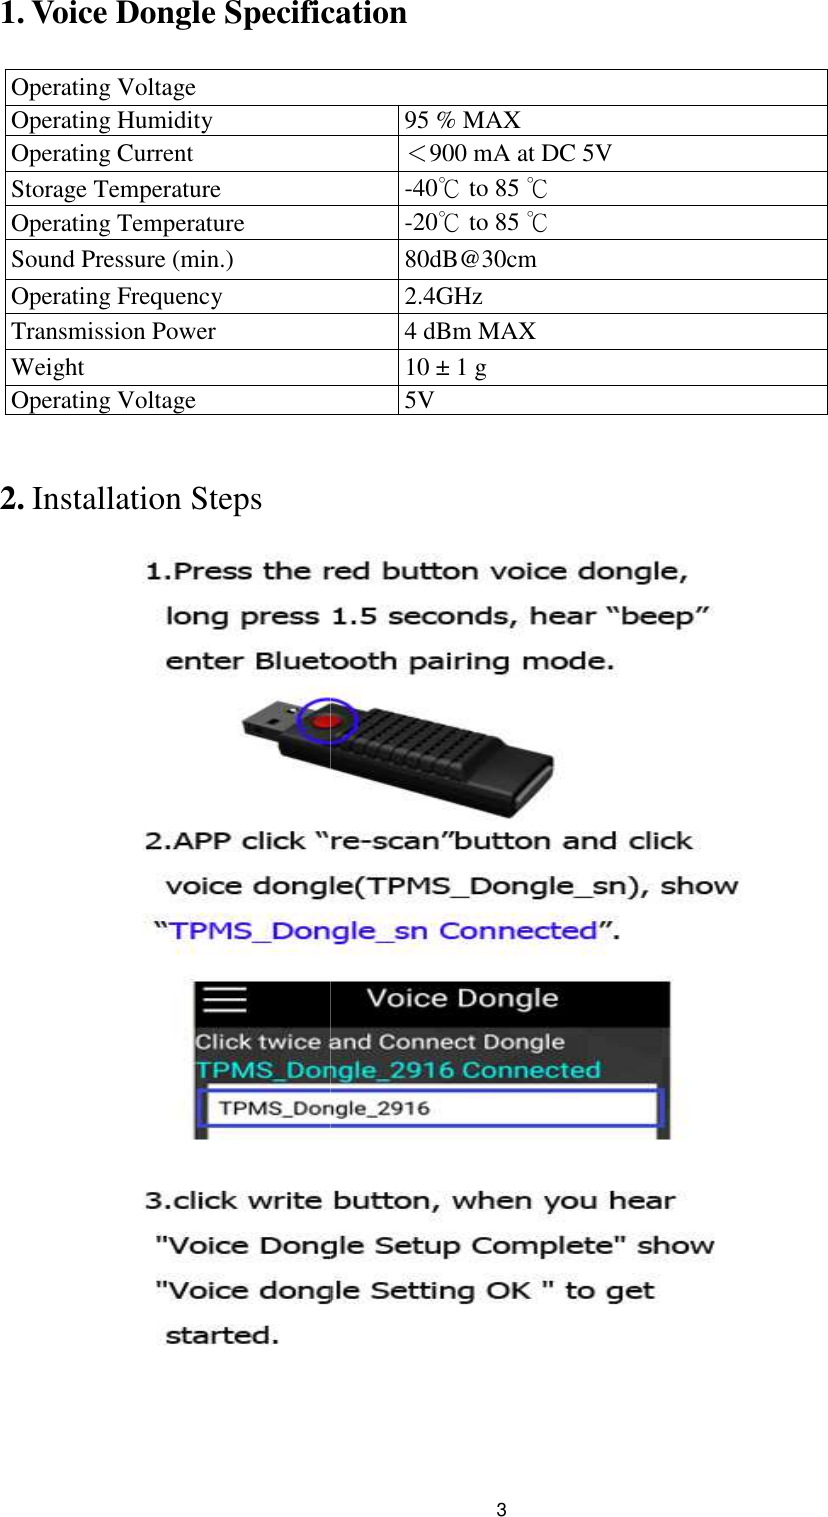 1. Voice Dongle Specification Operating Voltage Operating Humidity Operating Current Storage Temperature Operating Temperature Sound Pressure (min.) Operating Frequency Transmission Power Weight Operating Voltage  2. Installation Steps  3 Voice Dongle Specification    95 % MAX ＜900 mA at DC 5V -40℃ to 85 ℃ -20℃ to 85 ℃ 80dB@30cm 2.4GHz 4 dBm MAX  10 ± 1 g  5V  